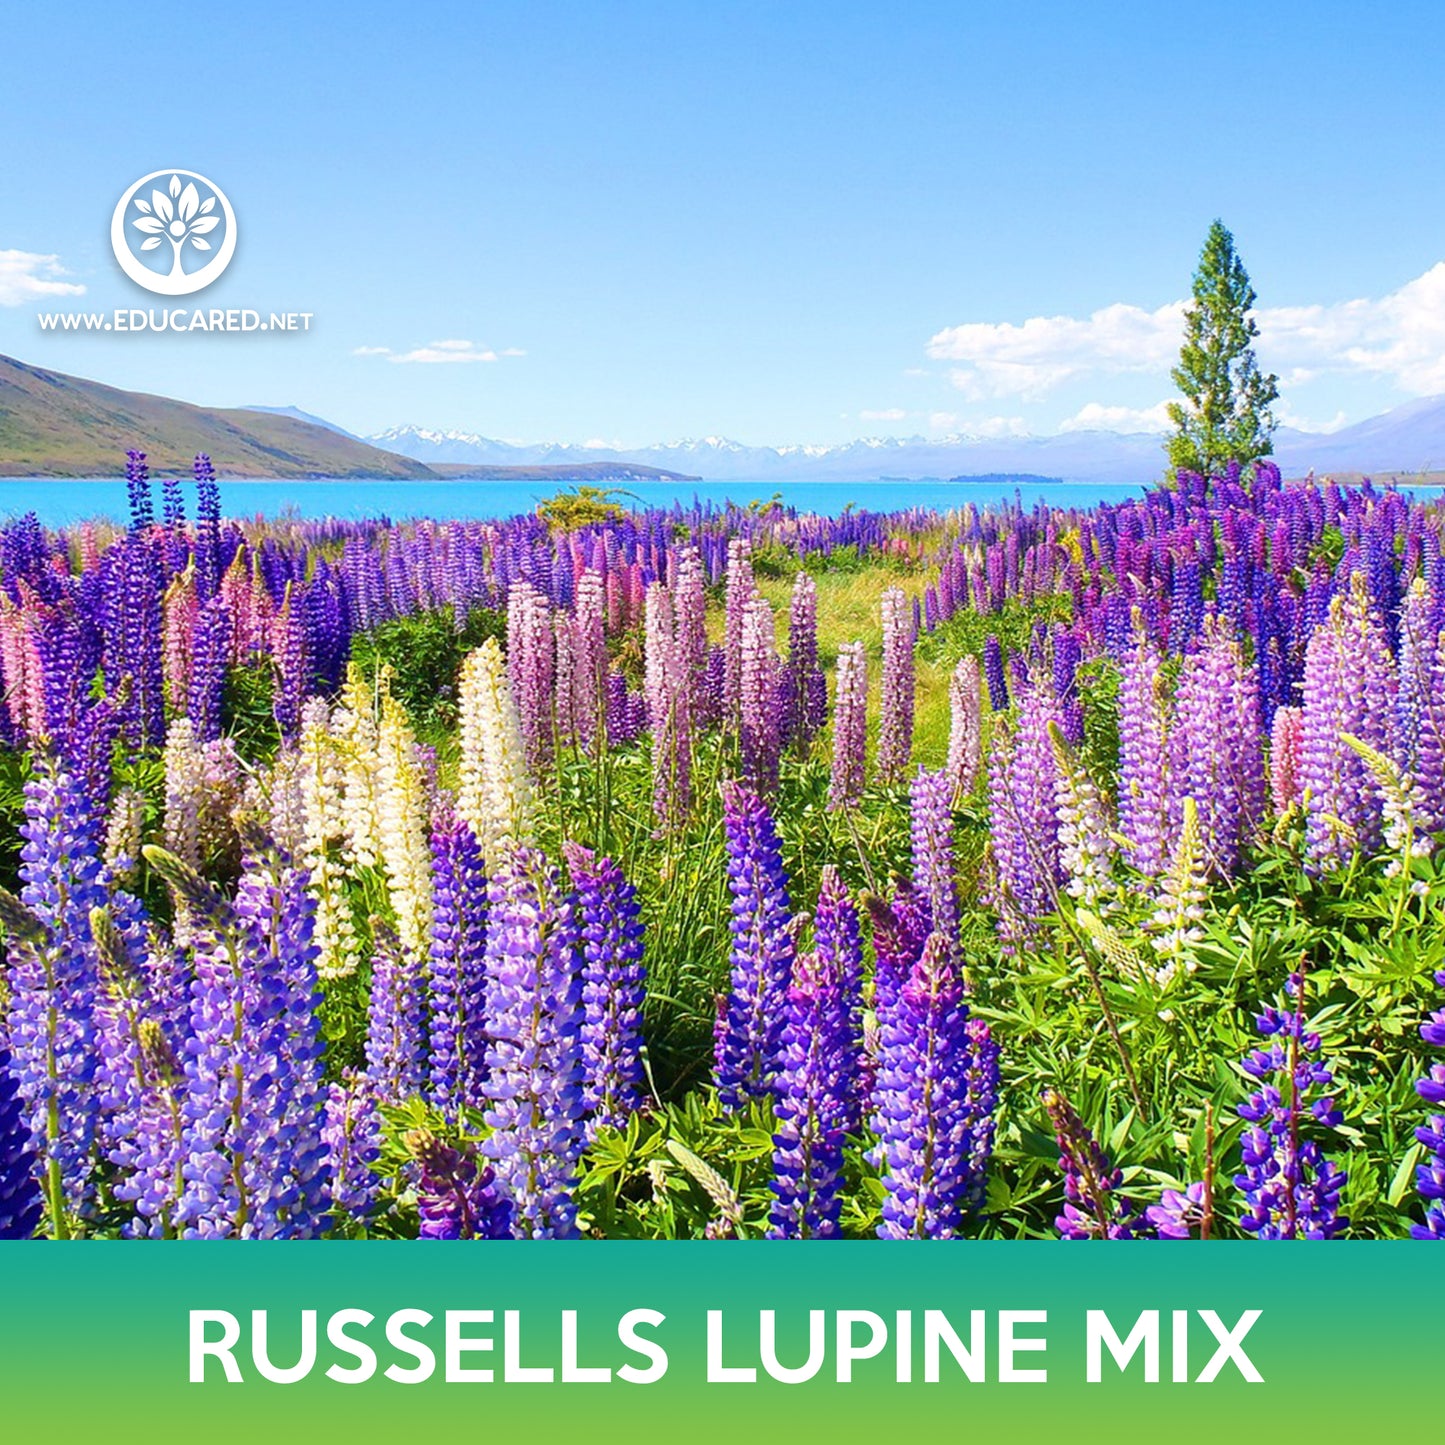 Russells Lupine Mix Seeds, Lupinus Polyphyllus Russell